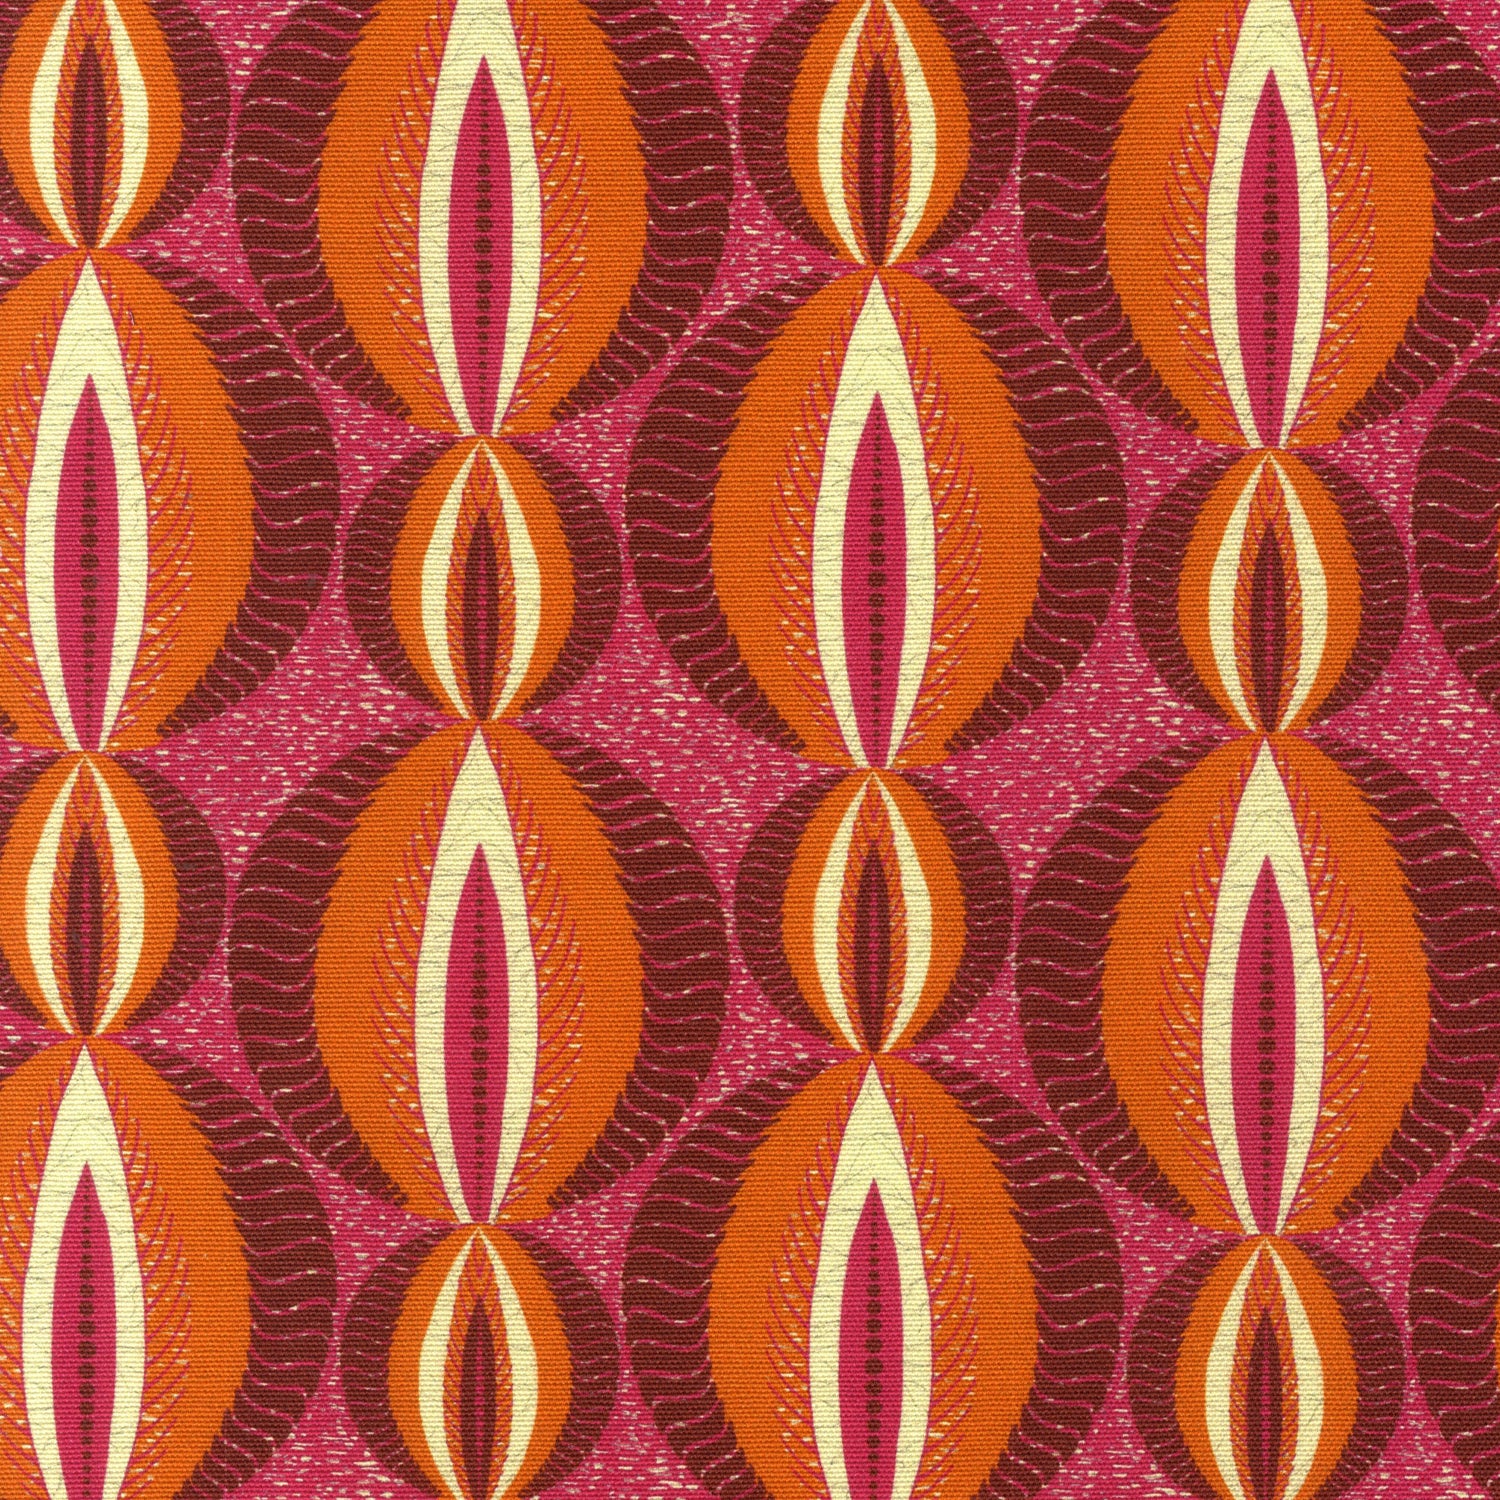 Detail of fabric in an interlocking circular stripe print in shades of pink, orange and purple on a pink field.